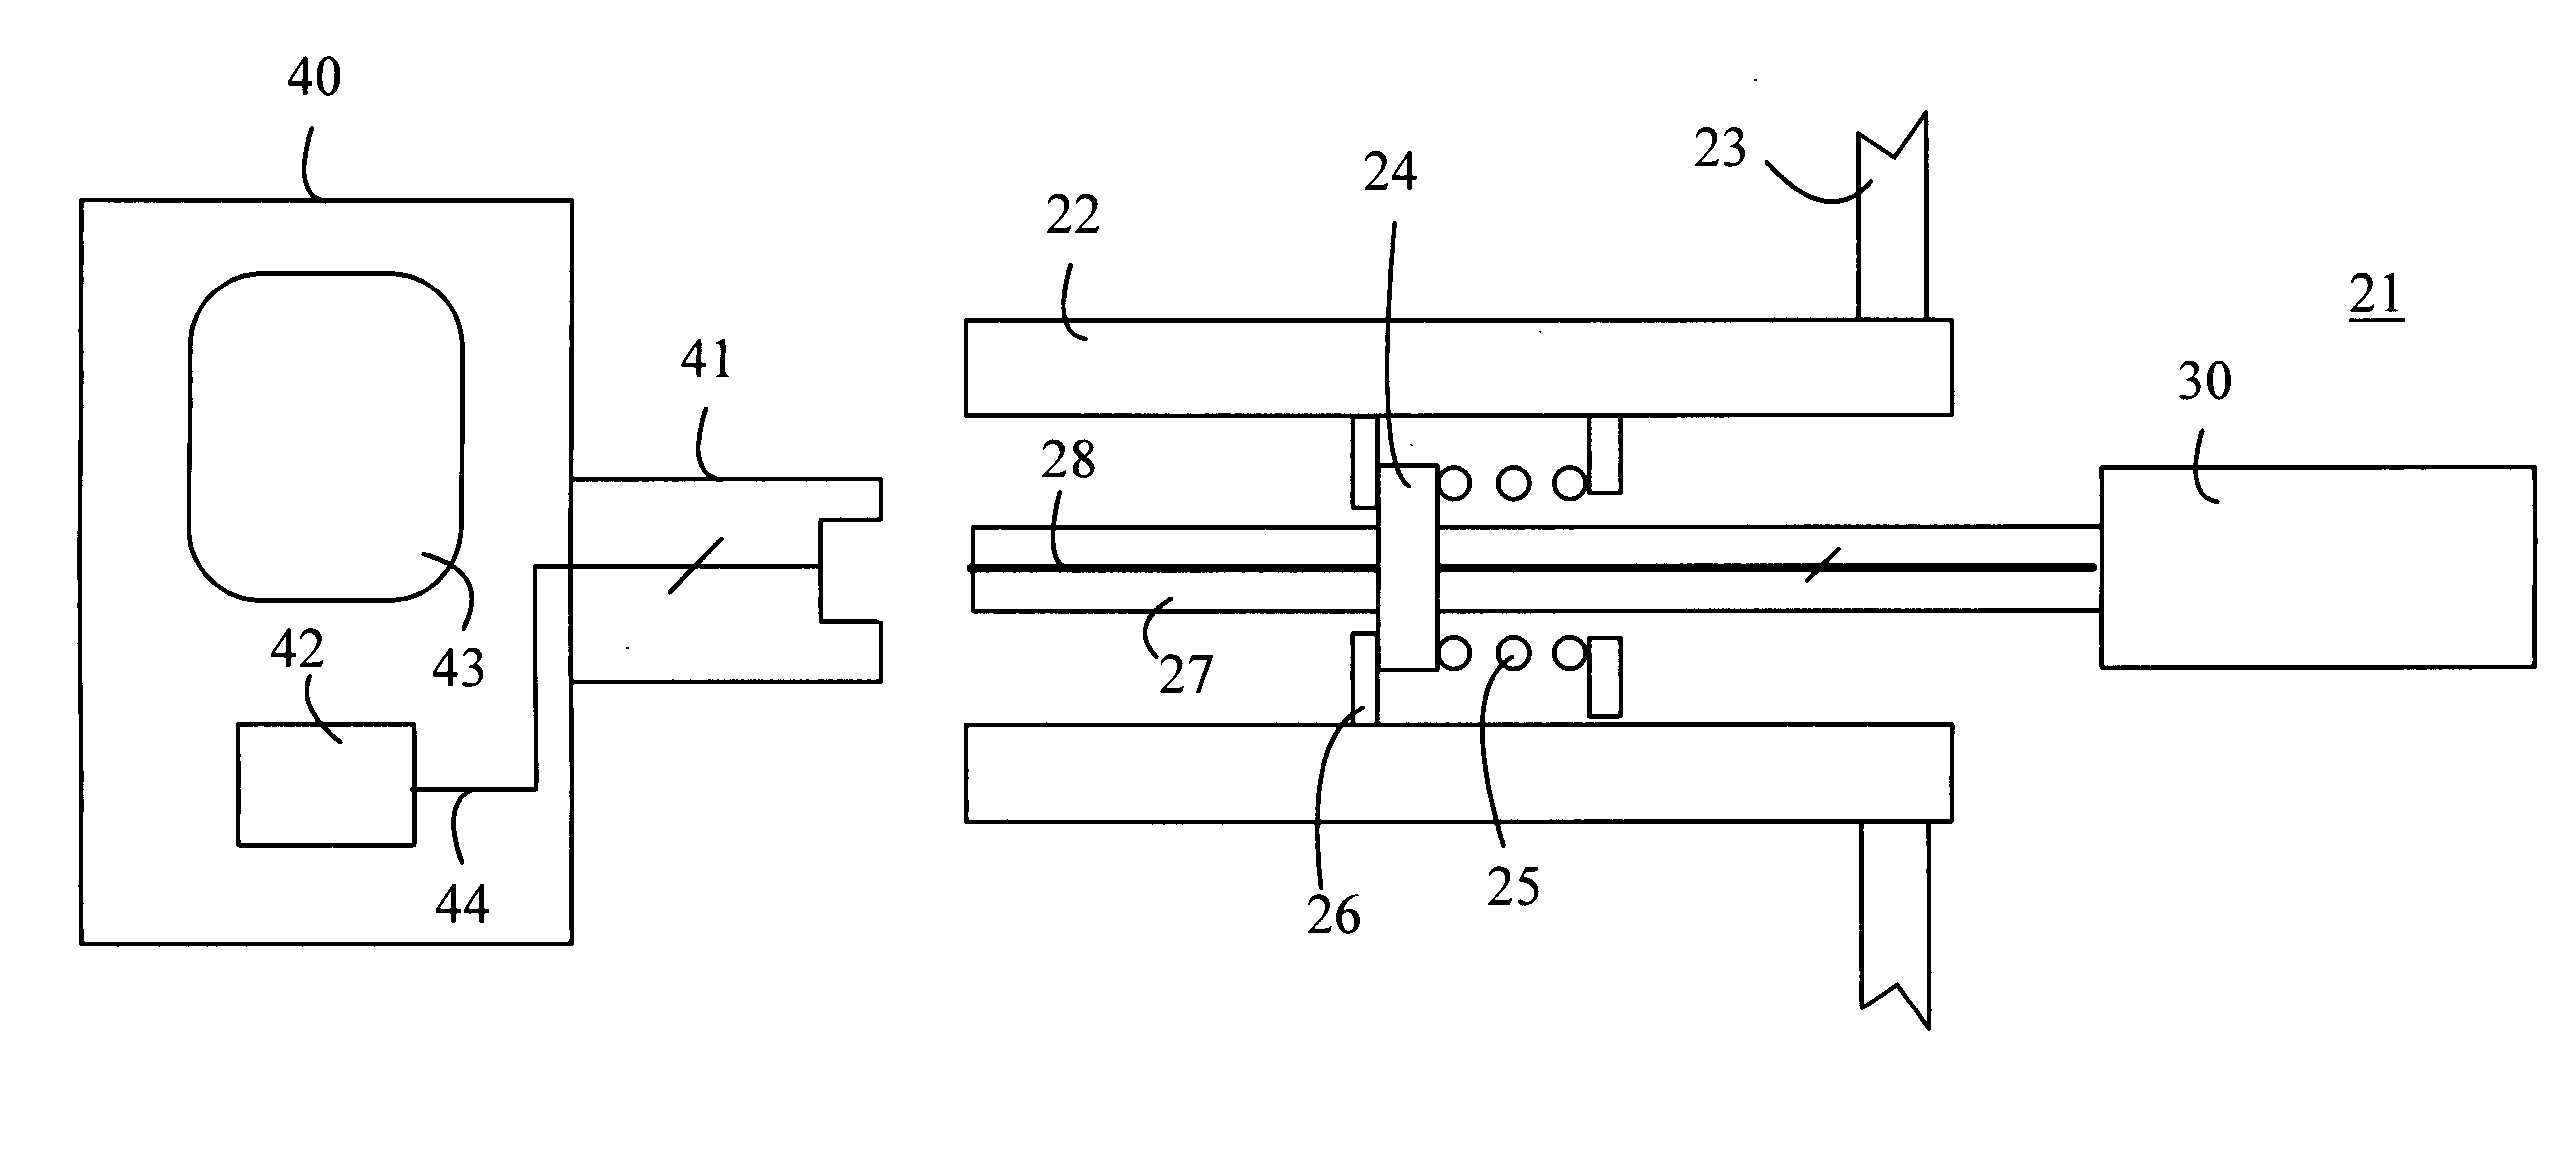 Method and apparatus for monitoring tire pressure